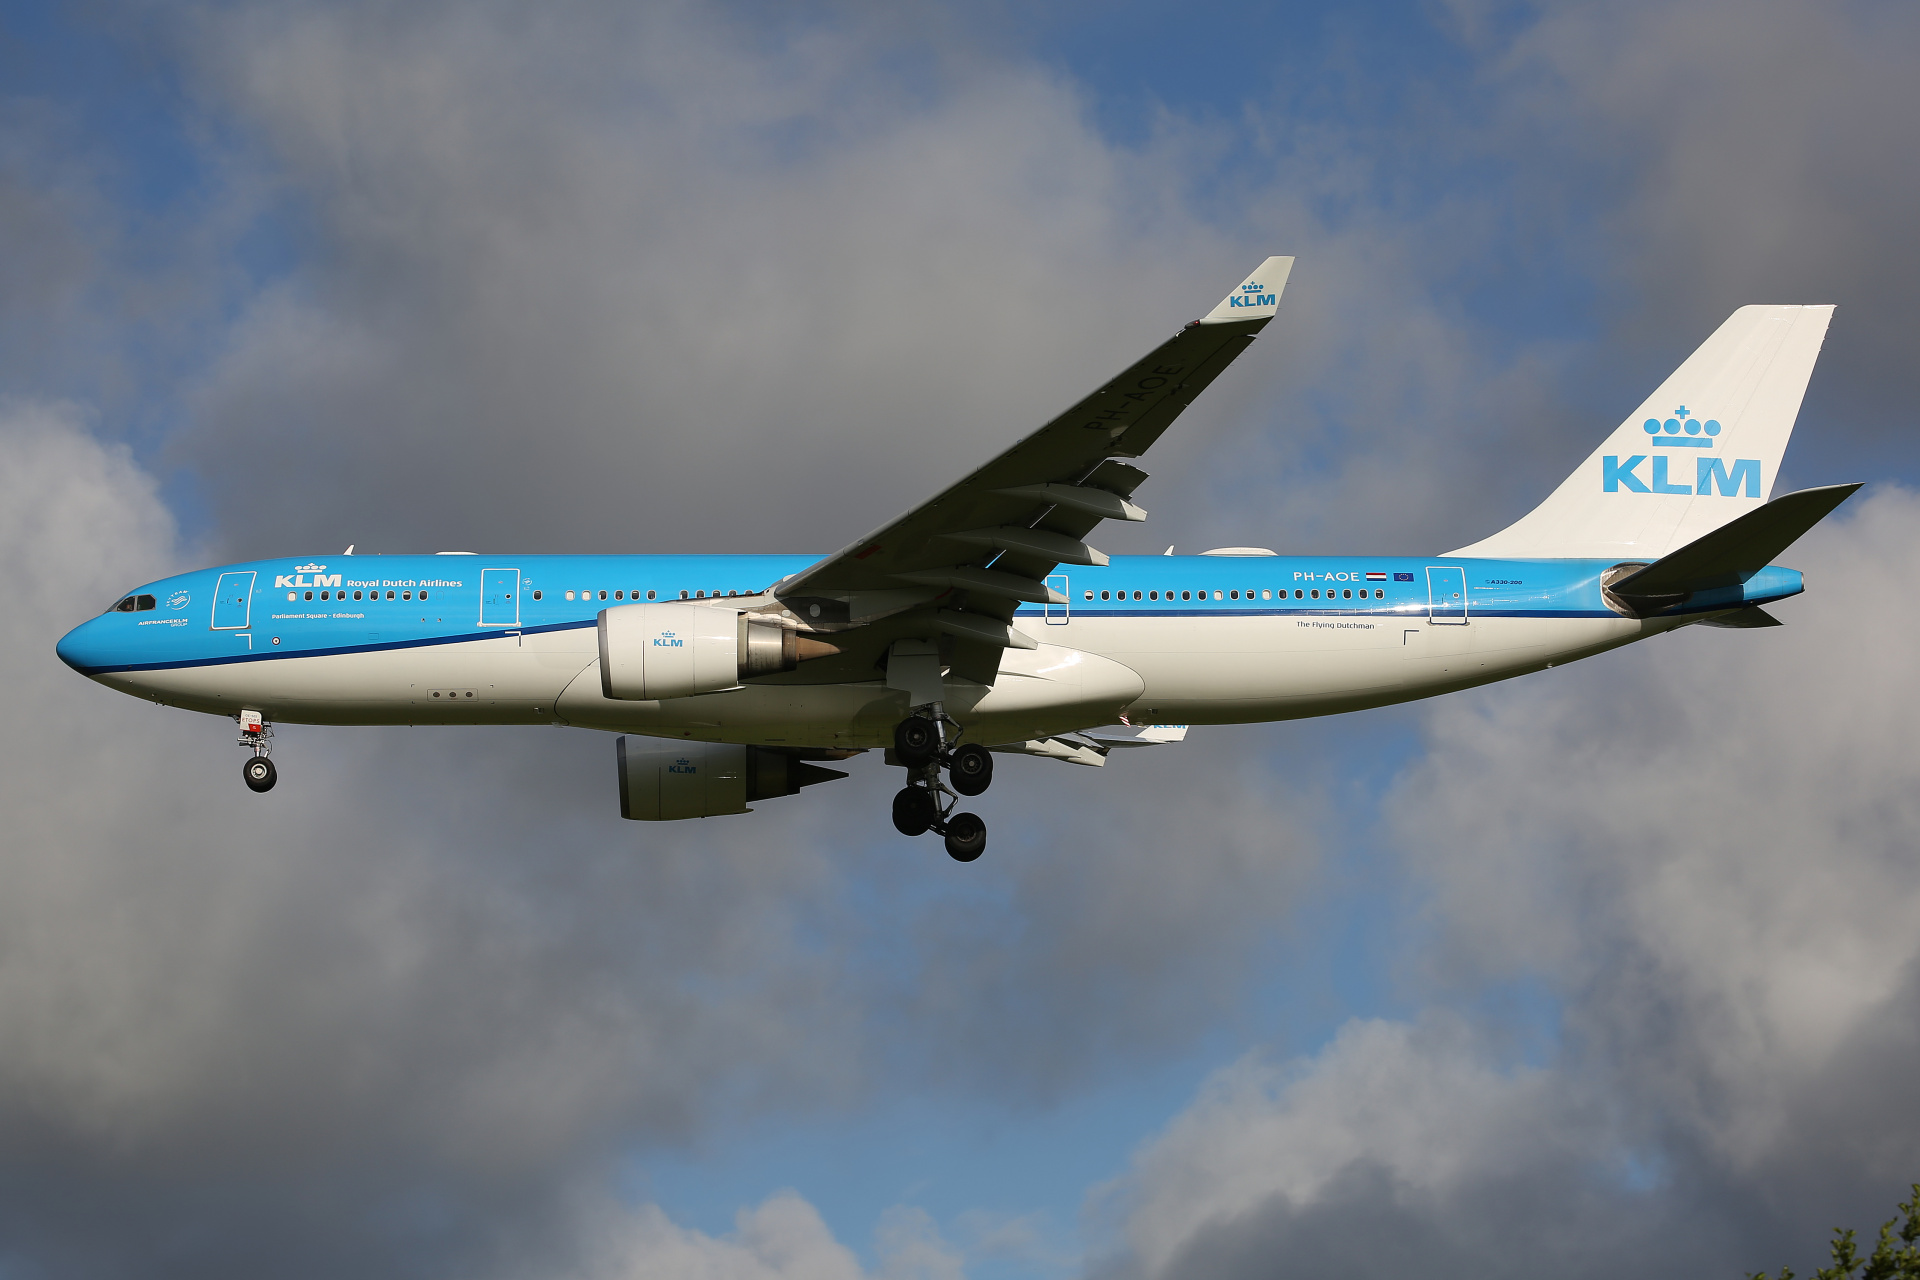 PH-AOE (new livery) (Aircraft » Schiphol Spotting » Airbus A330-200 » KLM Royal Dutch Airlines)